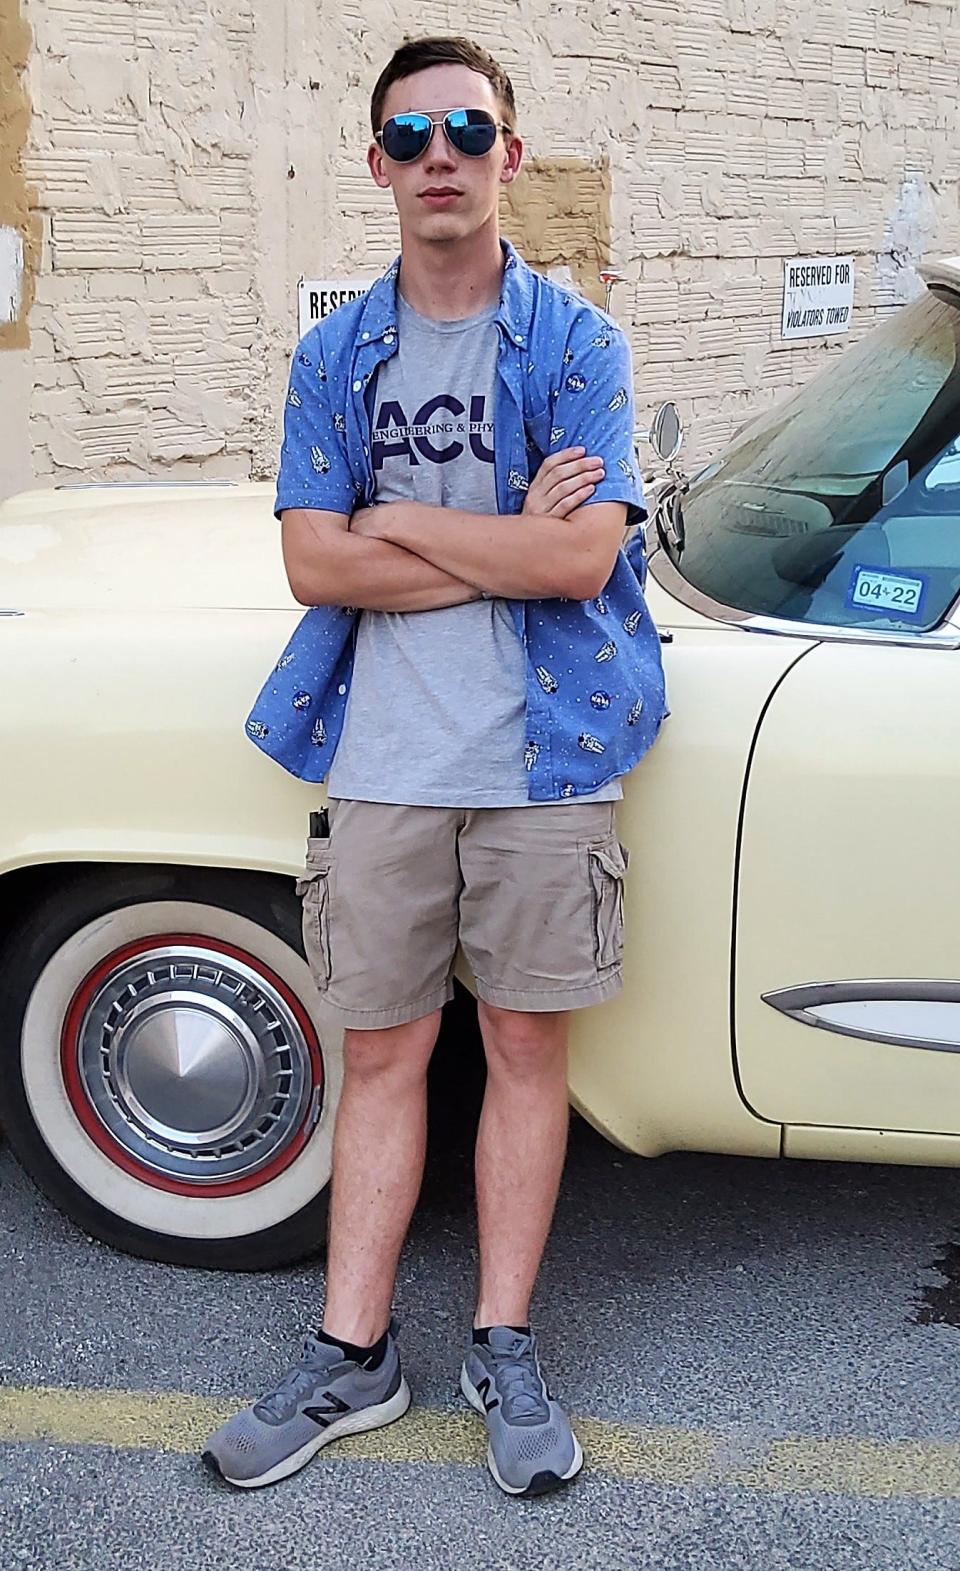 Duncan Lucas, more casually dressed, by another of his vintage cars, a 1958 Plymouth Plaza.